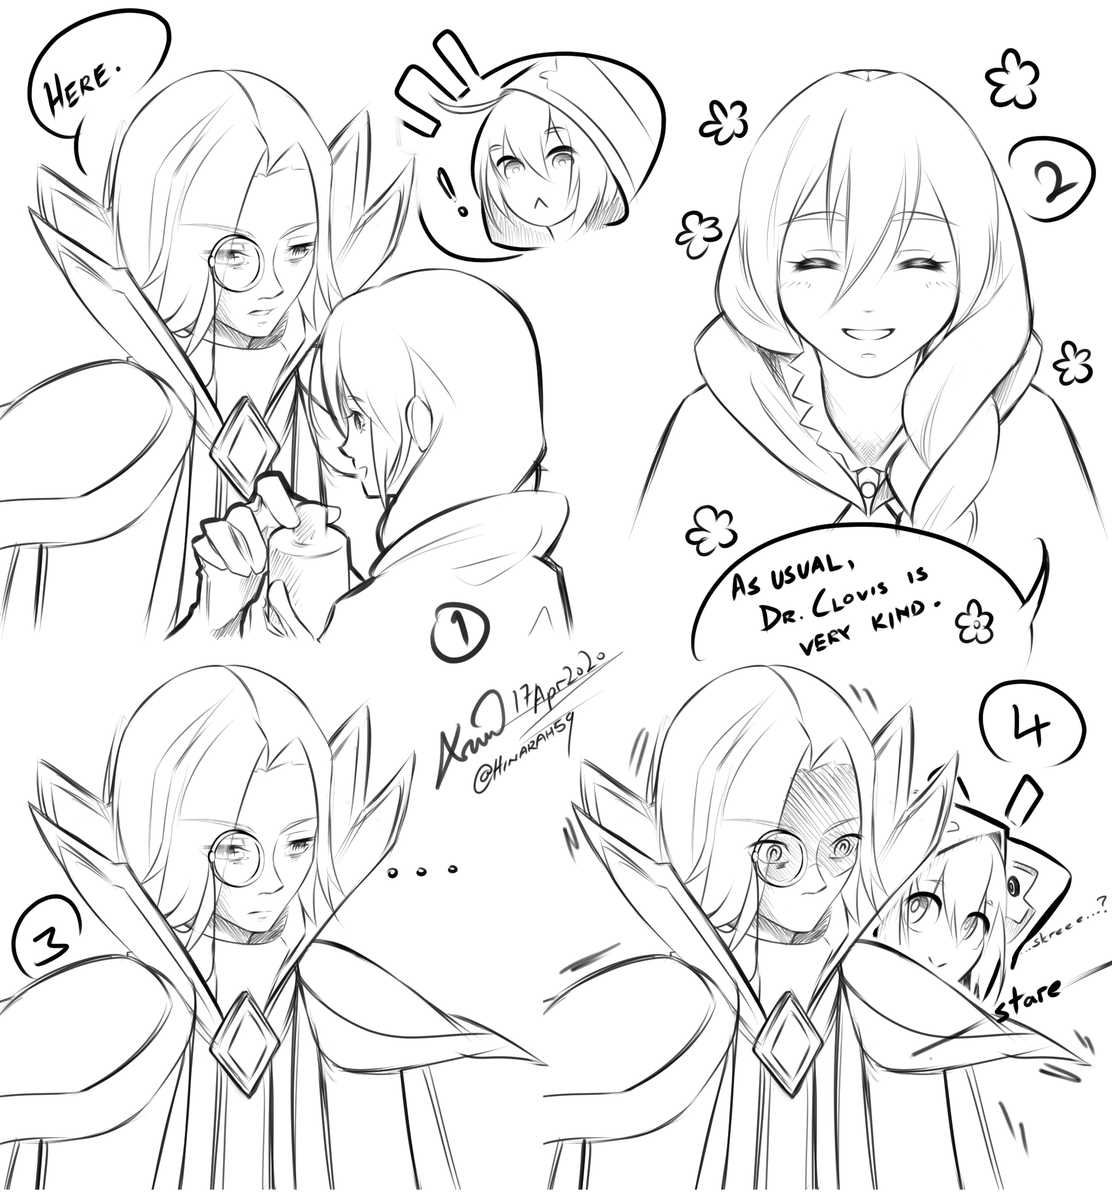 i know i said i'd do a charlemorris comic, but first...
gremlin!Morrio ft. prized student Aosta and sweet patient Nolva #sdorica 